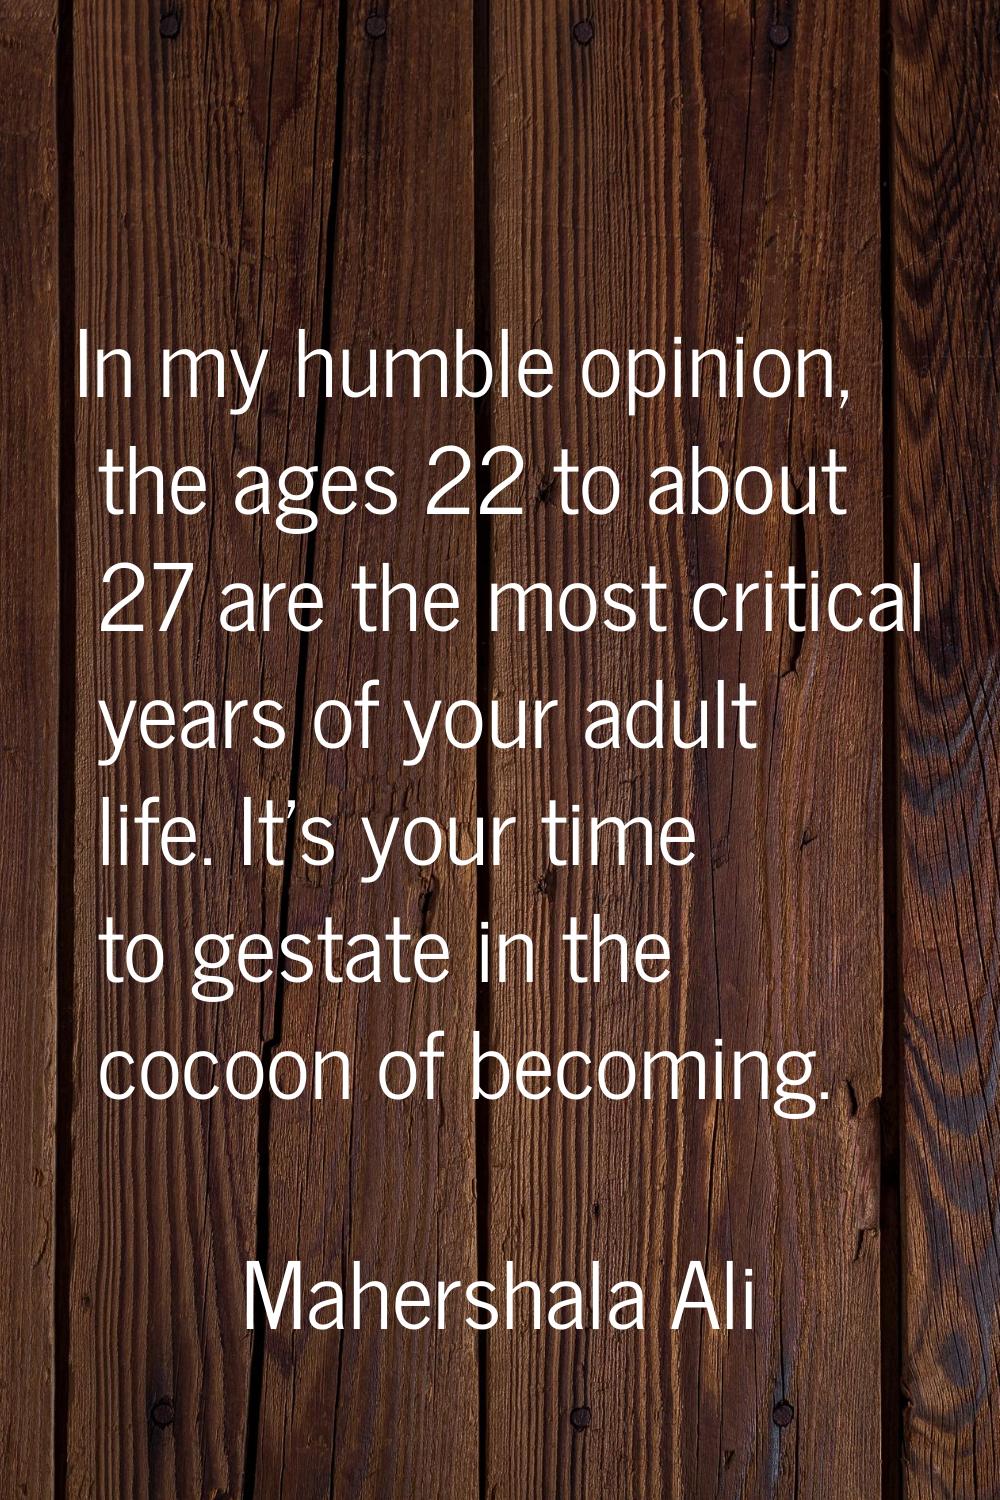 In my humble opinion, the ages 22 to about 27 are the most critical years of your adult life. It's 